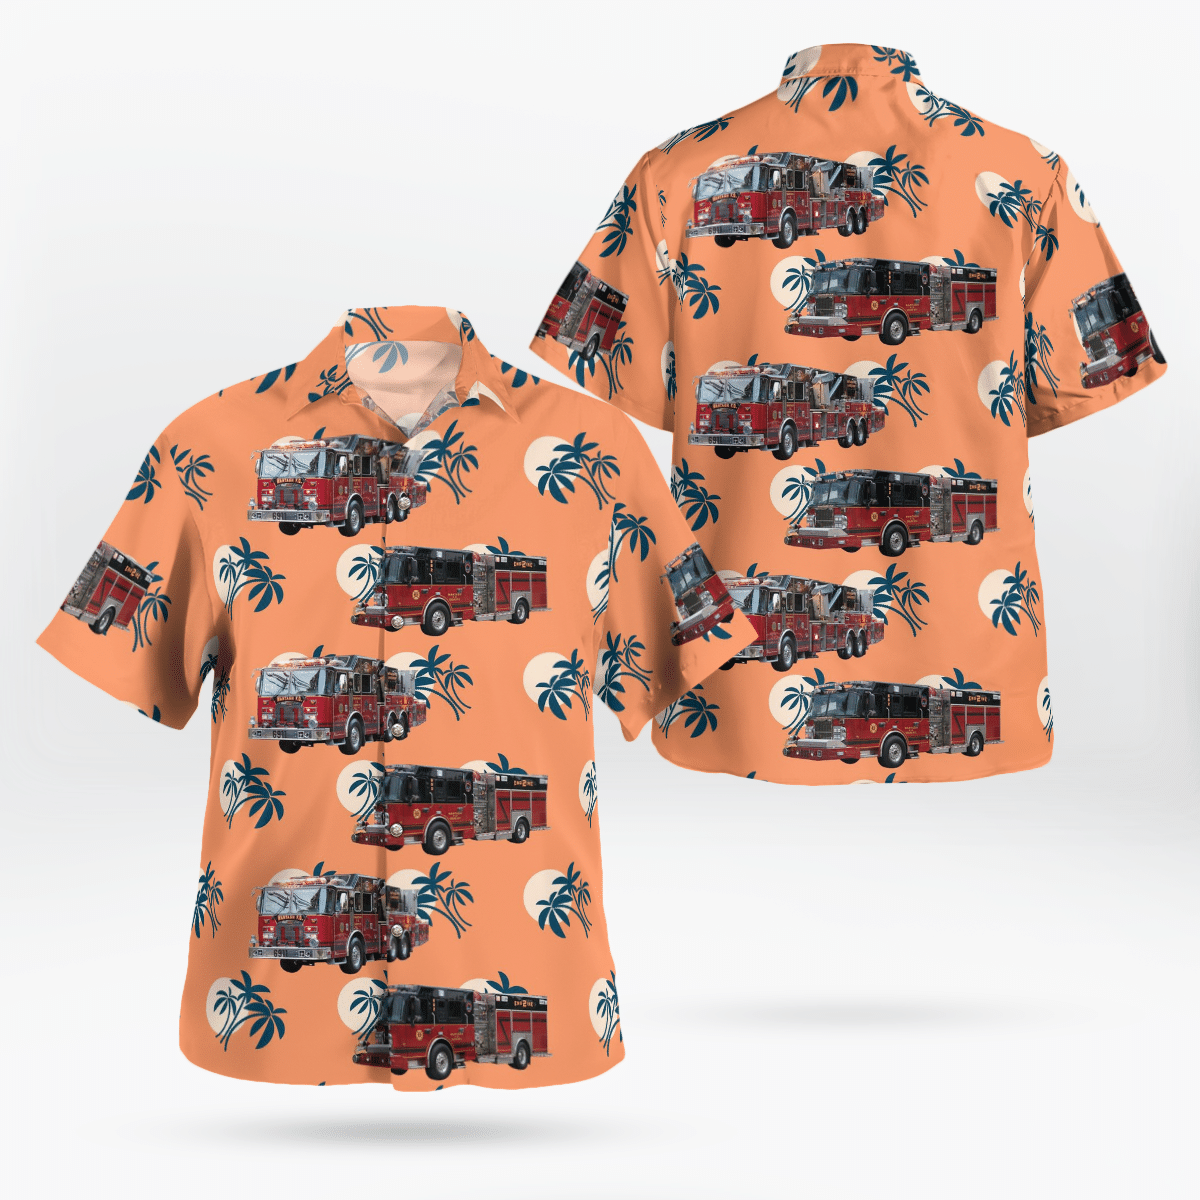 Some cool 3d hawaii shirt for this summer 69